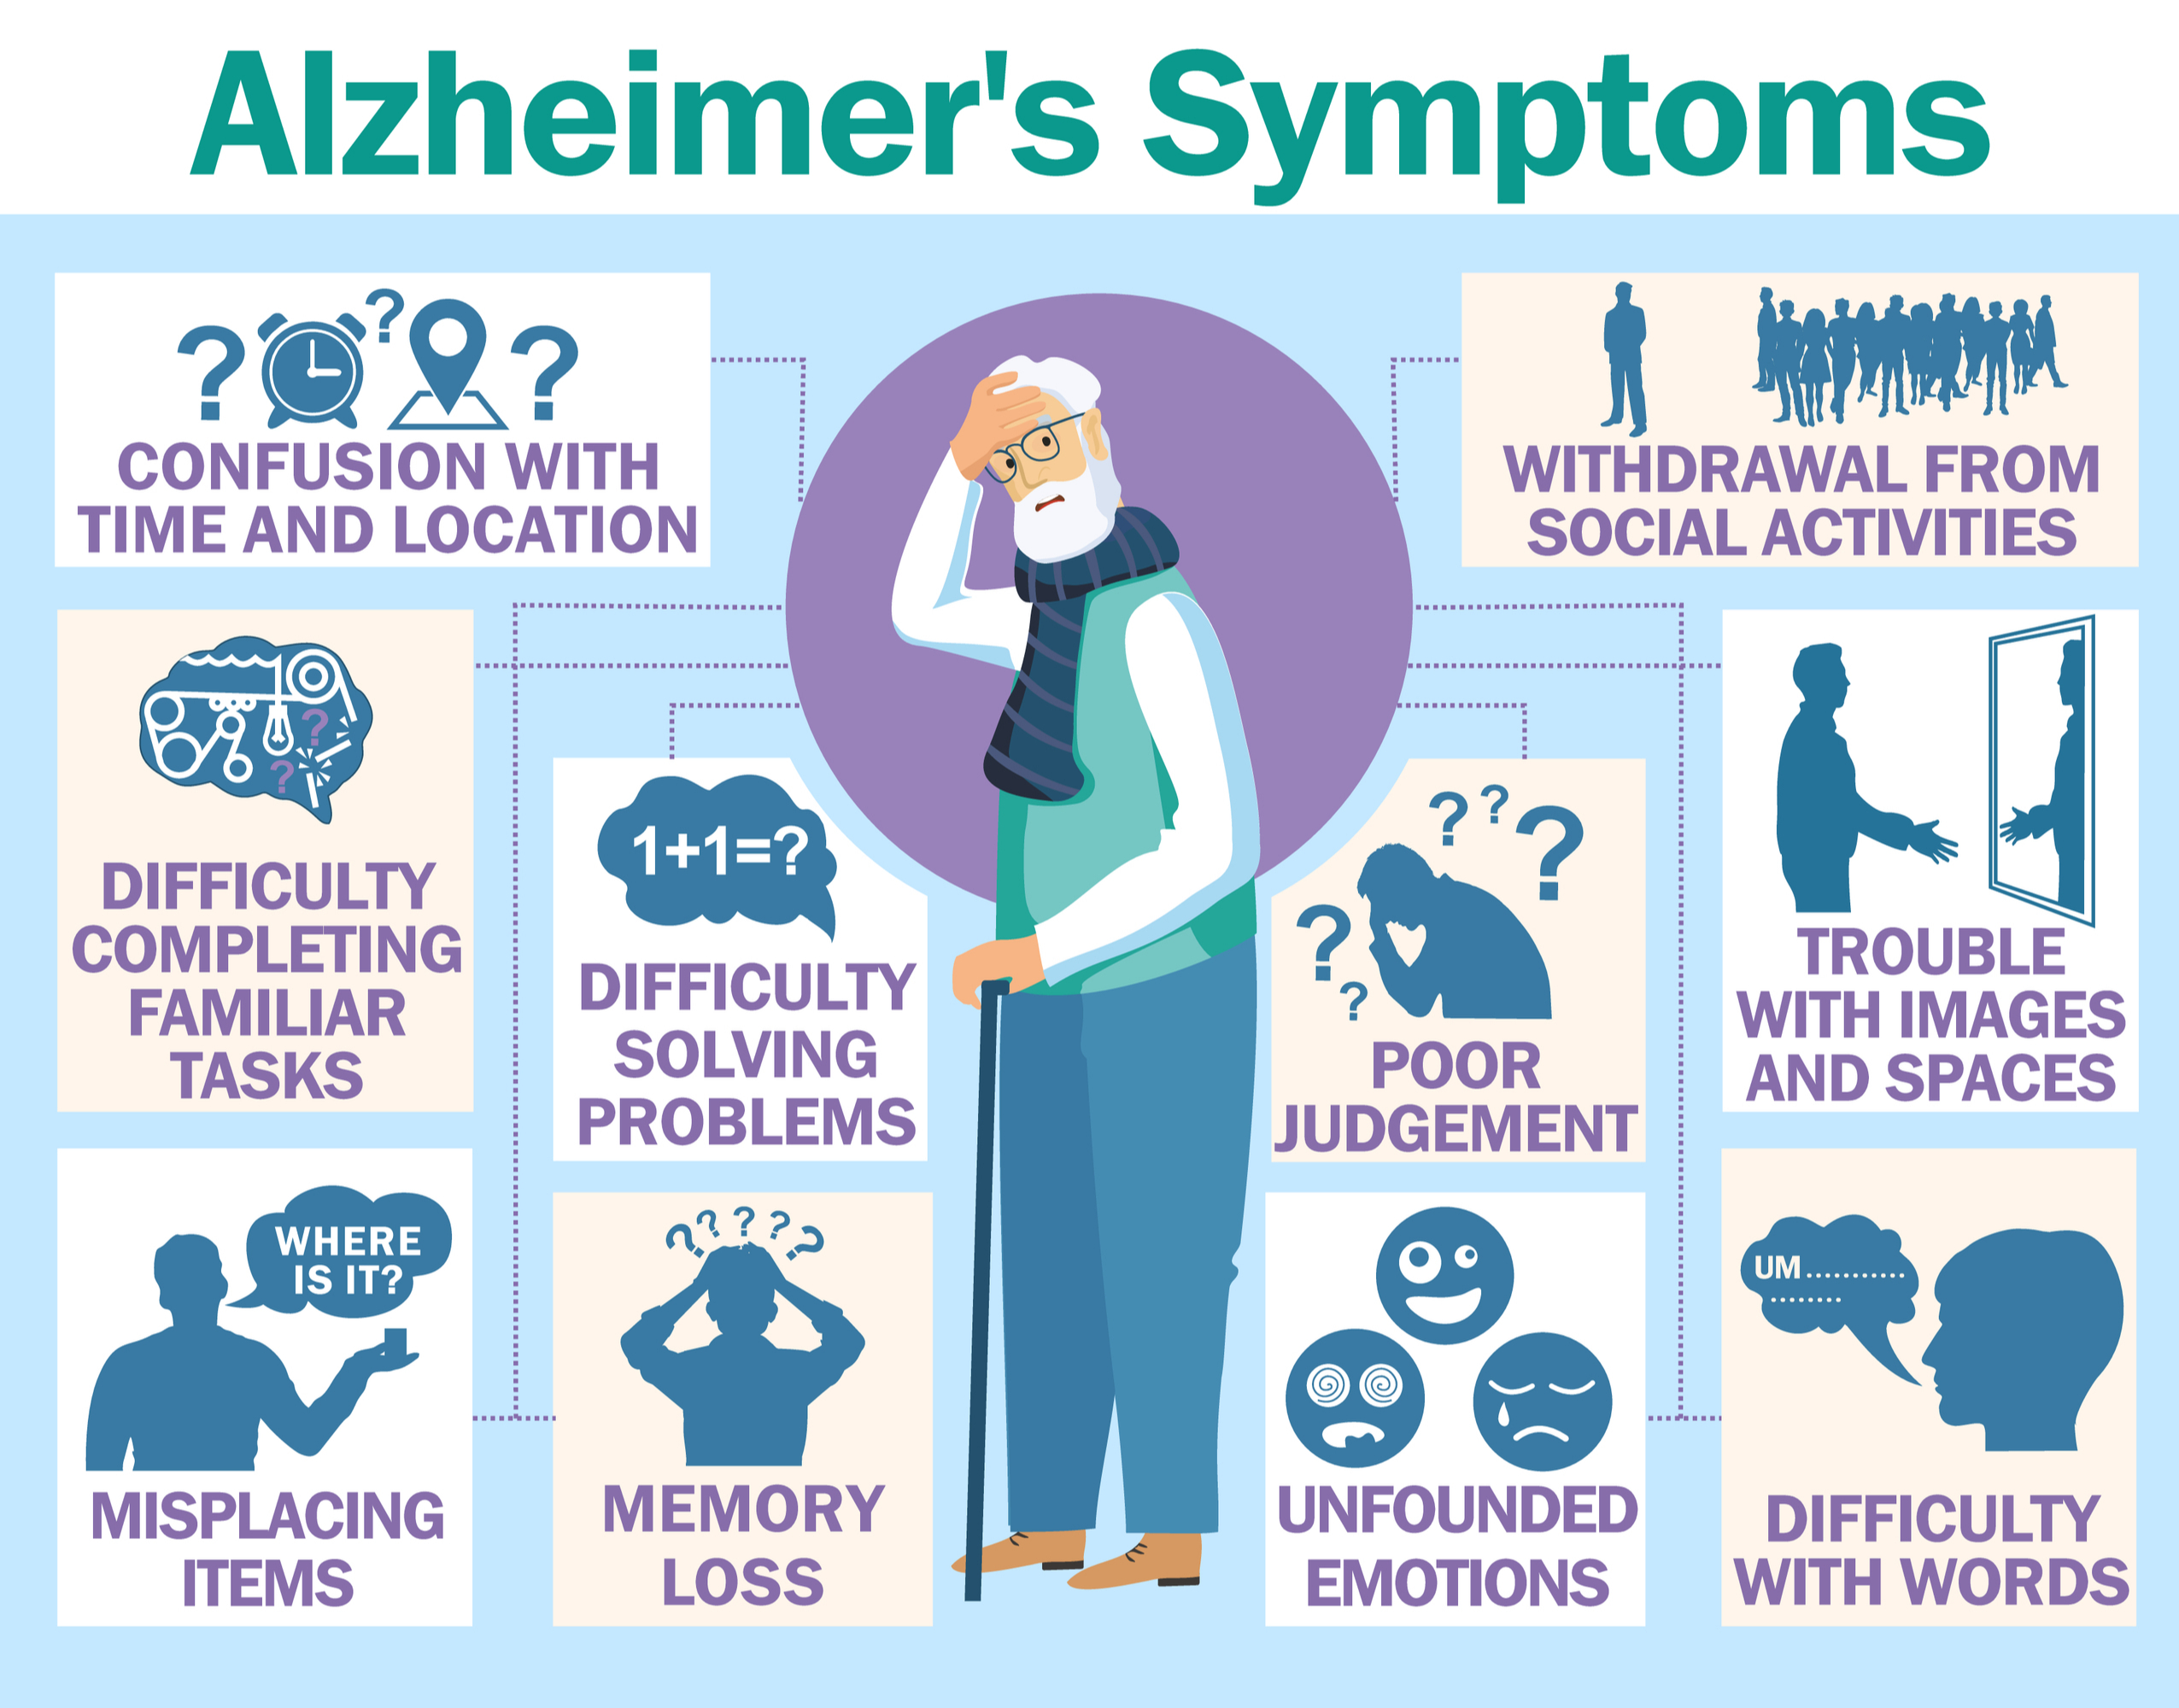 Alzheimer's Disease: Definition, Pathophysiology, Symptoms, Treatment and MCQs for NEET, GPAT, CSIR NET JRF - Gpatindia: Pharmacy Jobs, Admissions, Scholarships, Conference,Grants, Exam Alerts